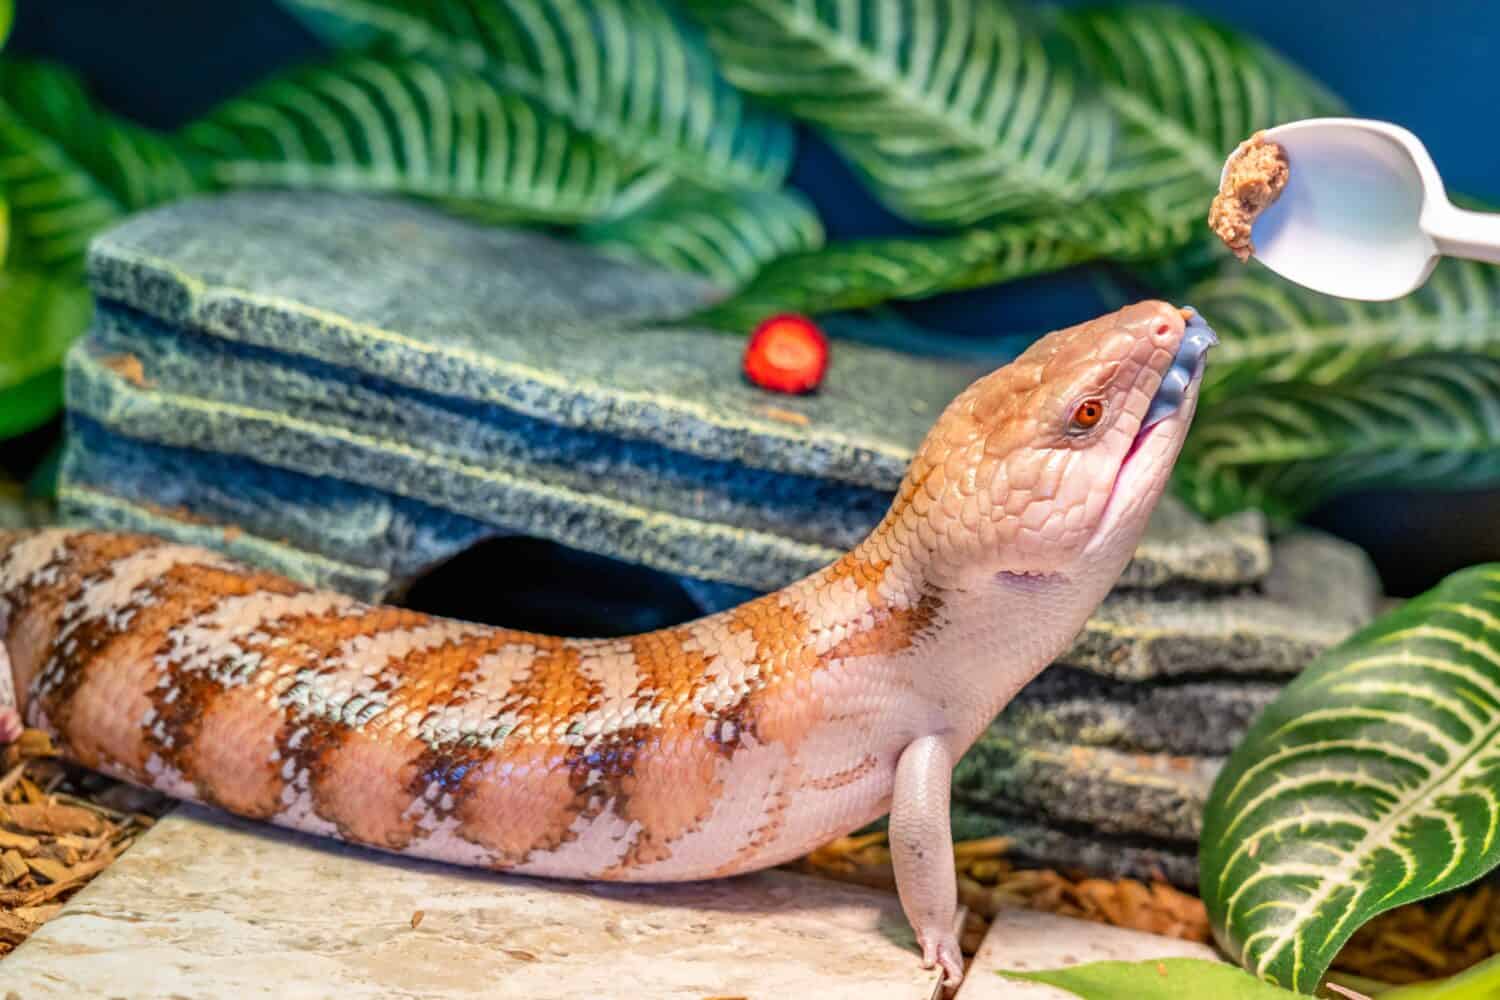 Skink lizard (family Scincidae) opens its mouth and shows a blue tongue while it is feeding in a terrarium. Skinks are popular lizards for keeping in a home terrarium with an unusual long blue tongue.